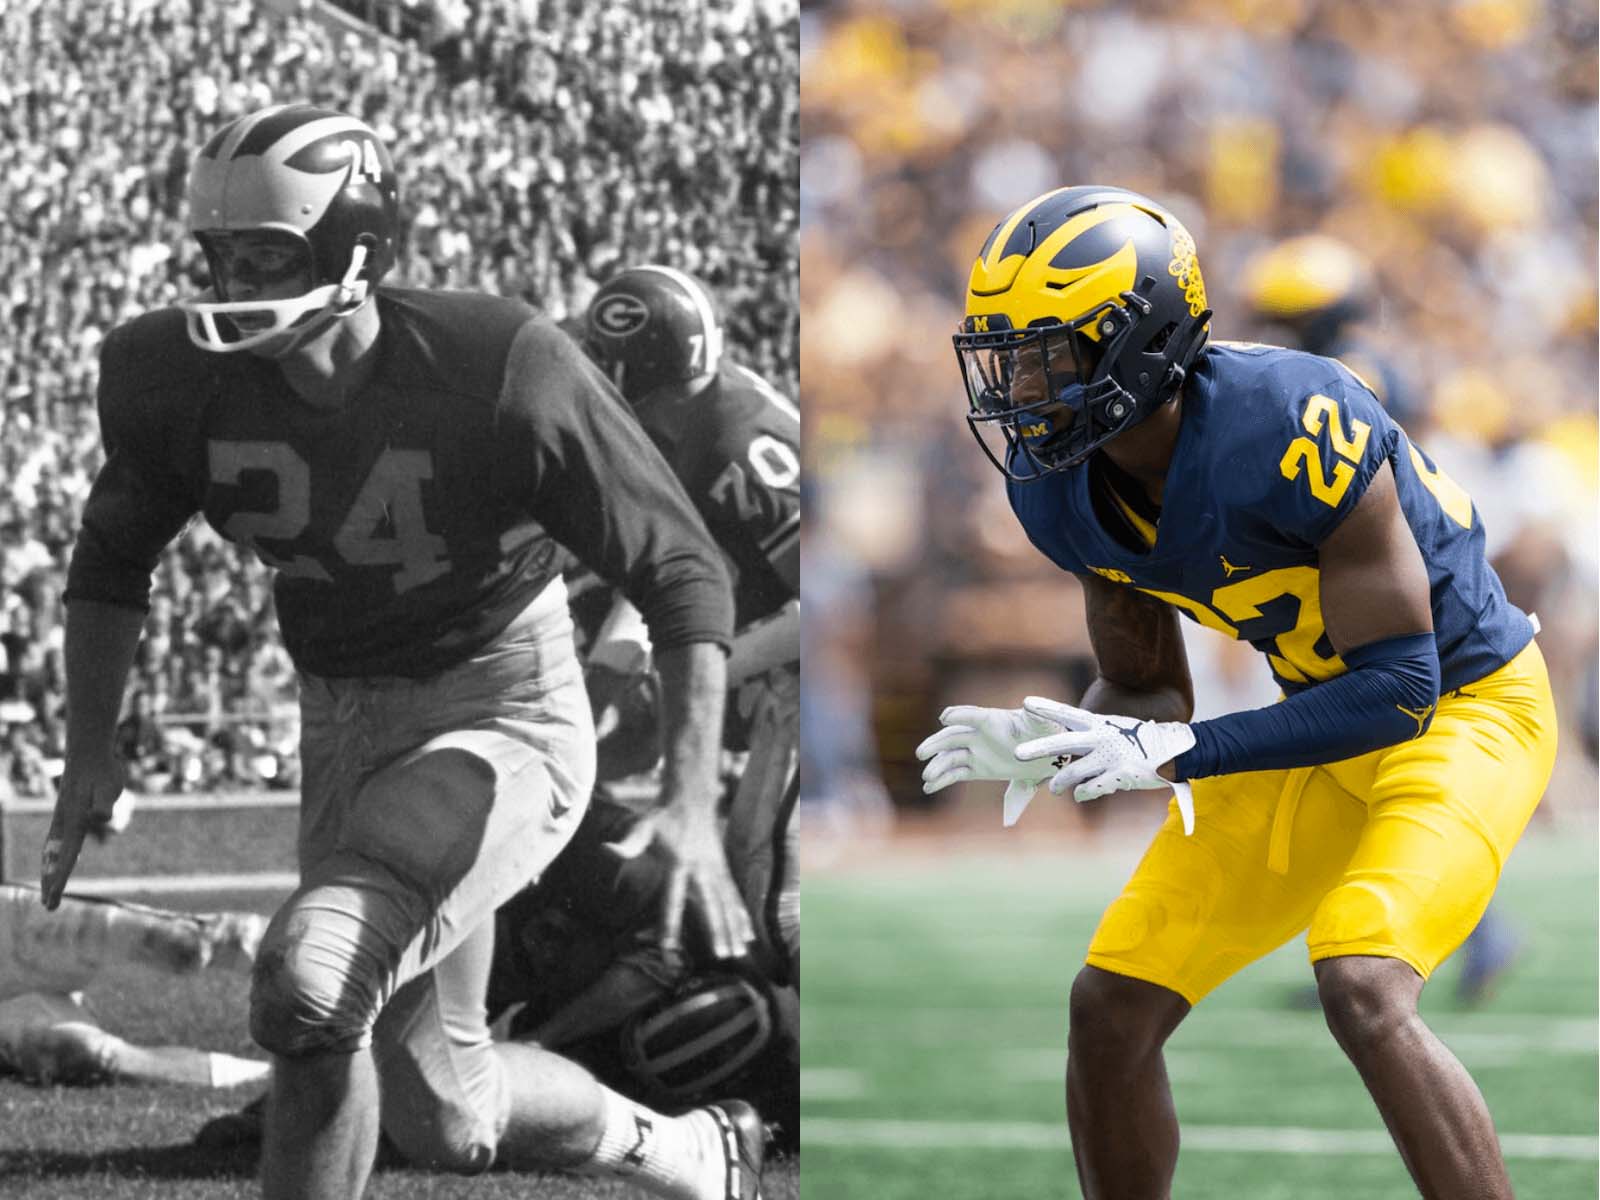 Michigan uniforms in 1965 and 1921